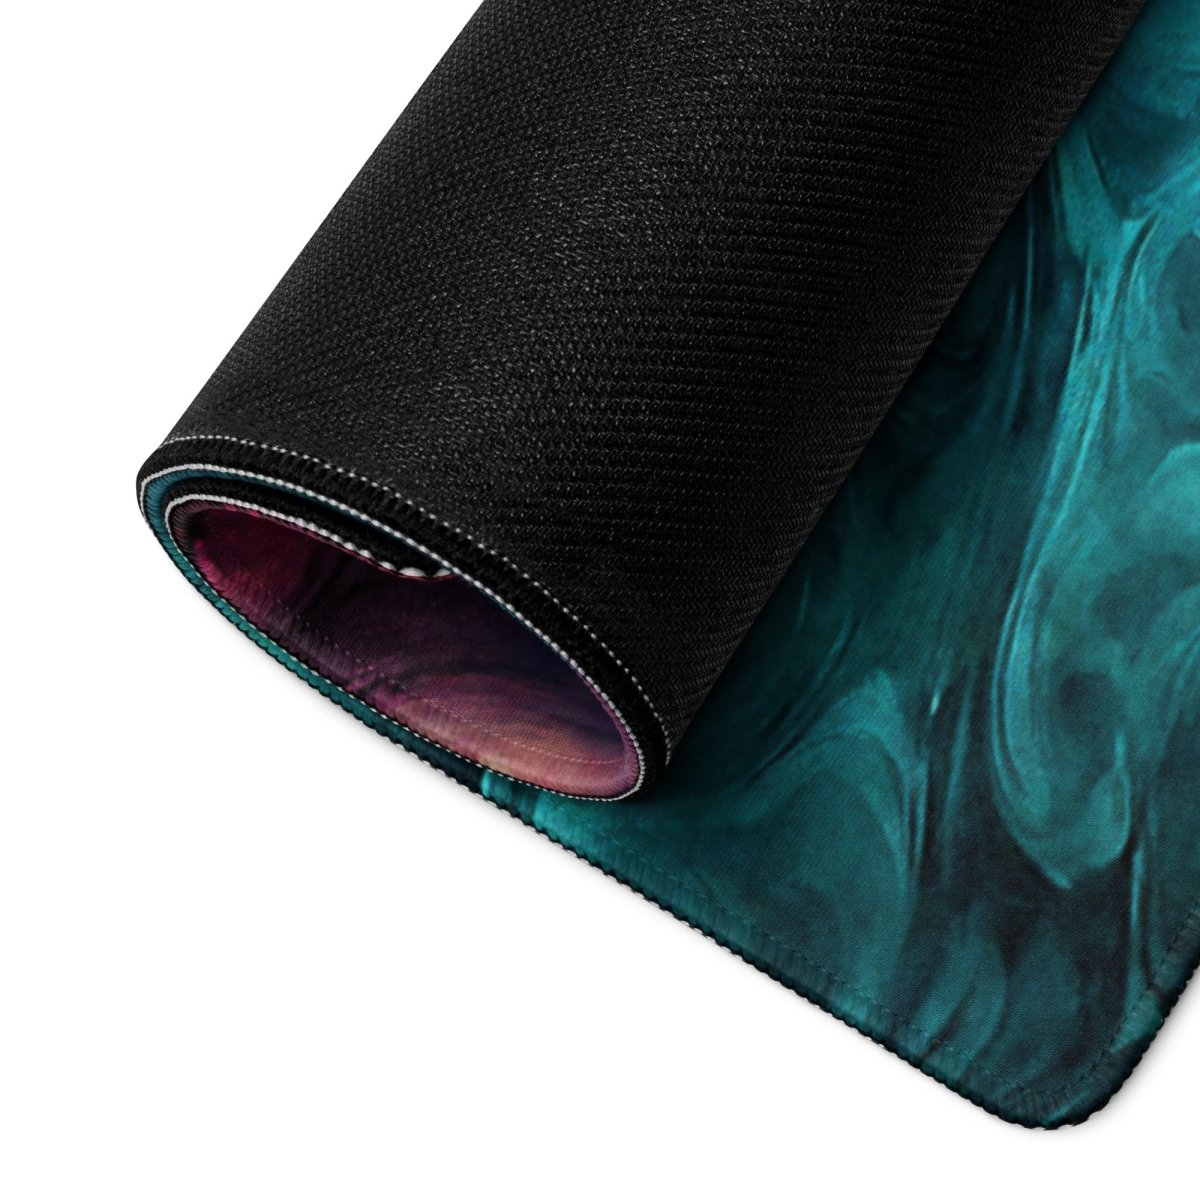 Smoke colours - Gaming mouse pad - Ever colorful